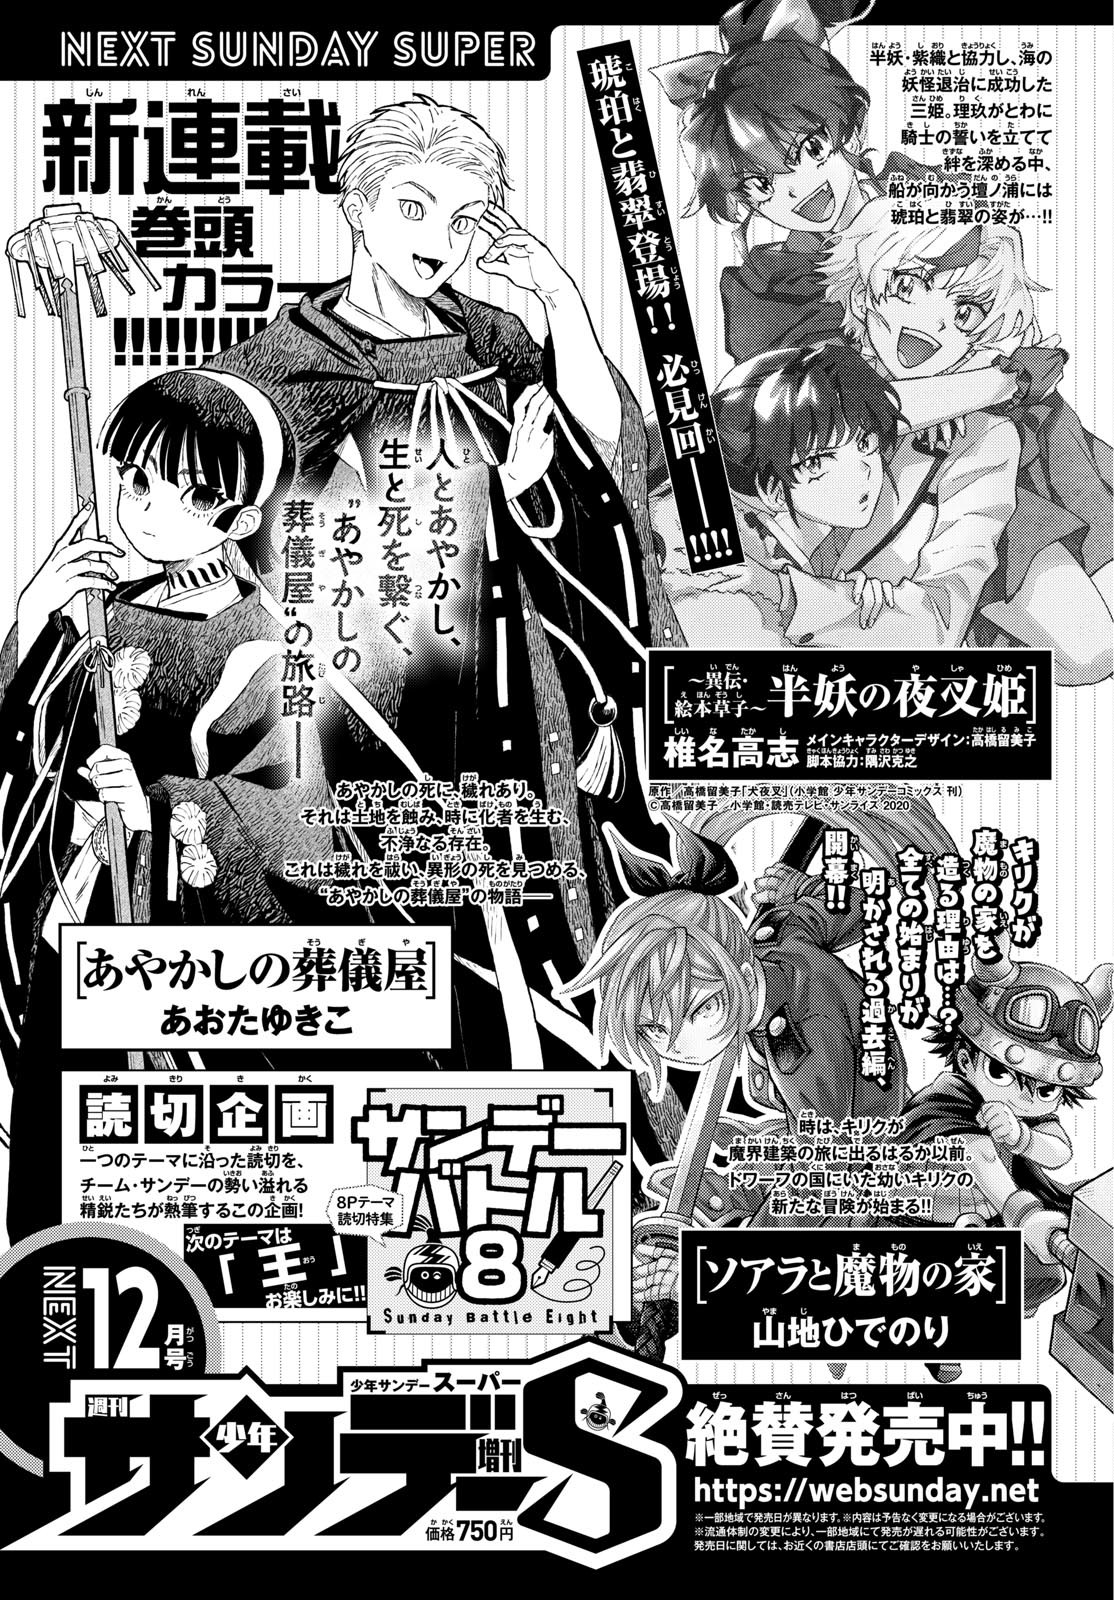 Weekly Shōnen Sunday - 週刊少年サンデー - Chapter 2023-50 - Page 393